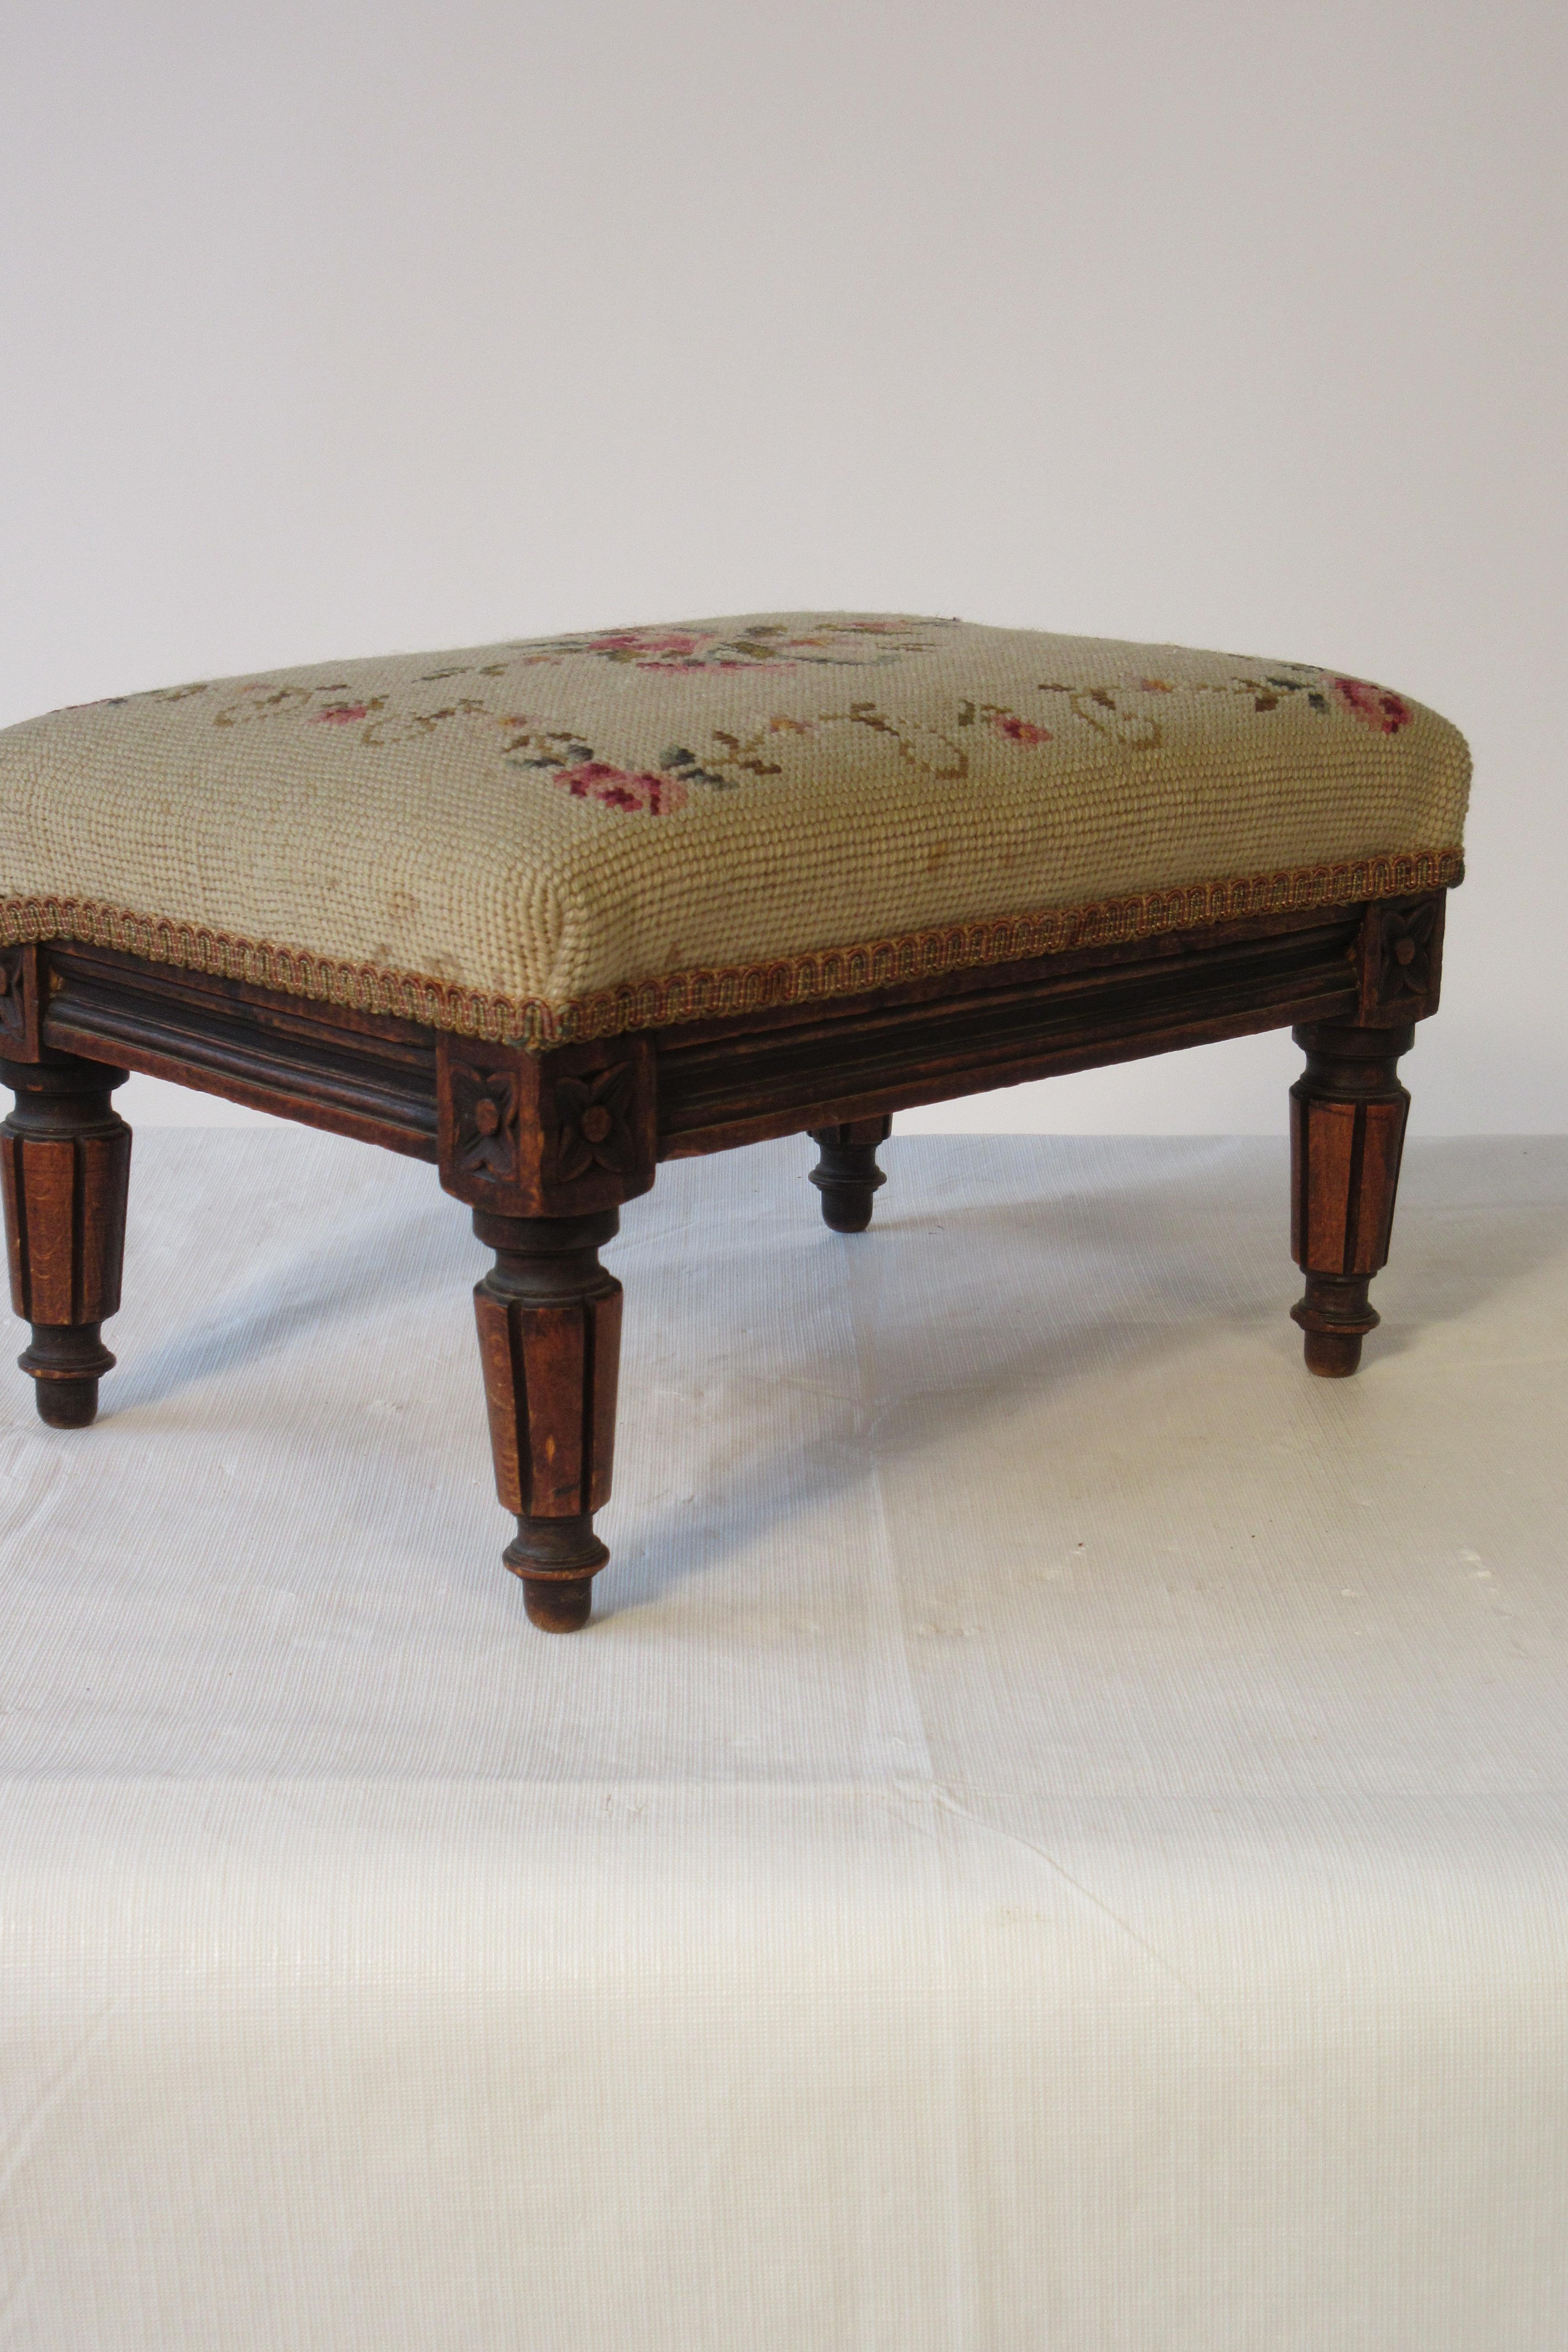 Turn of the century French carved wood footstool. Needlepoint cushion. Needs reupholstering.